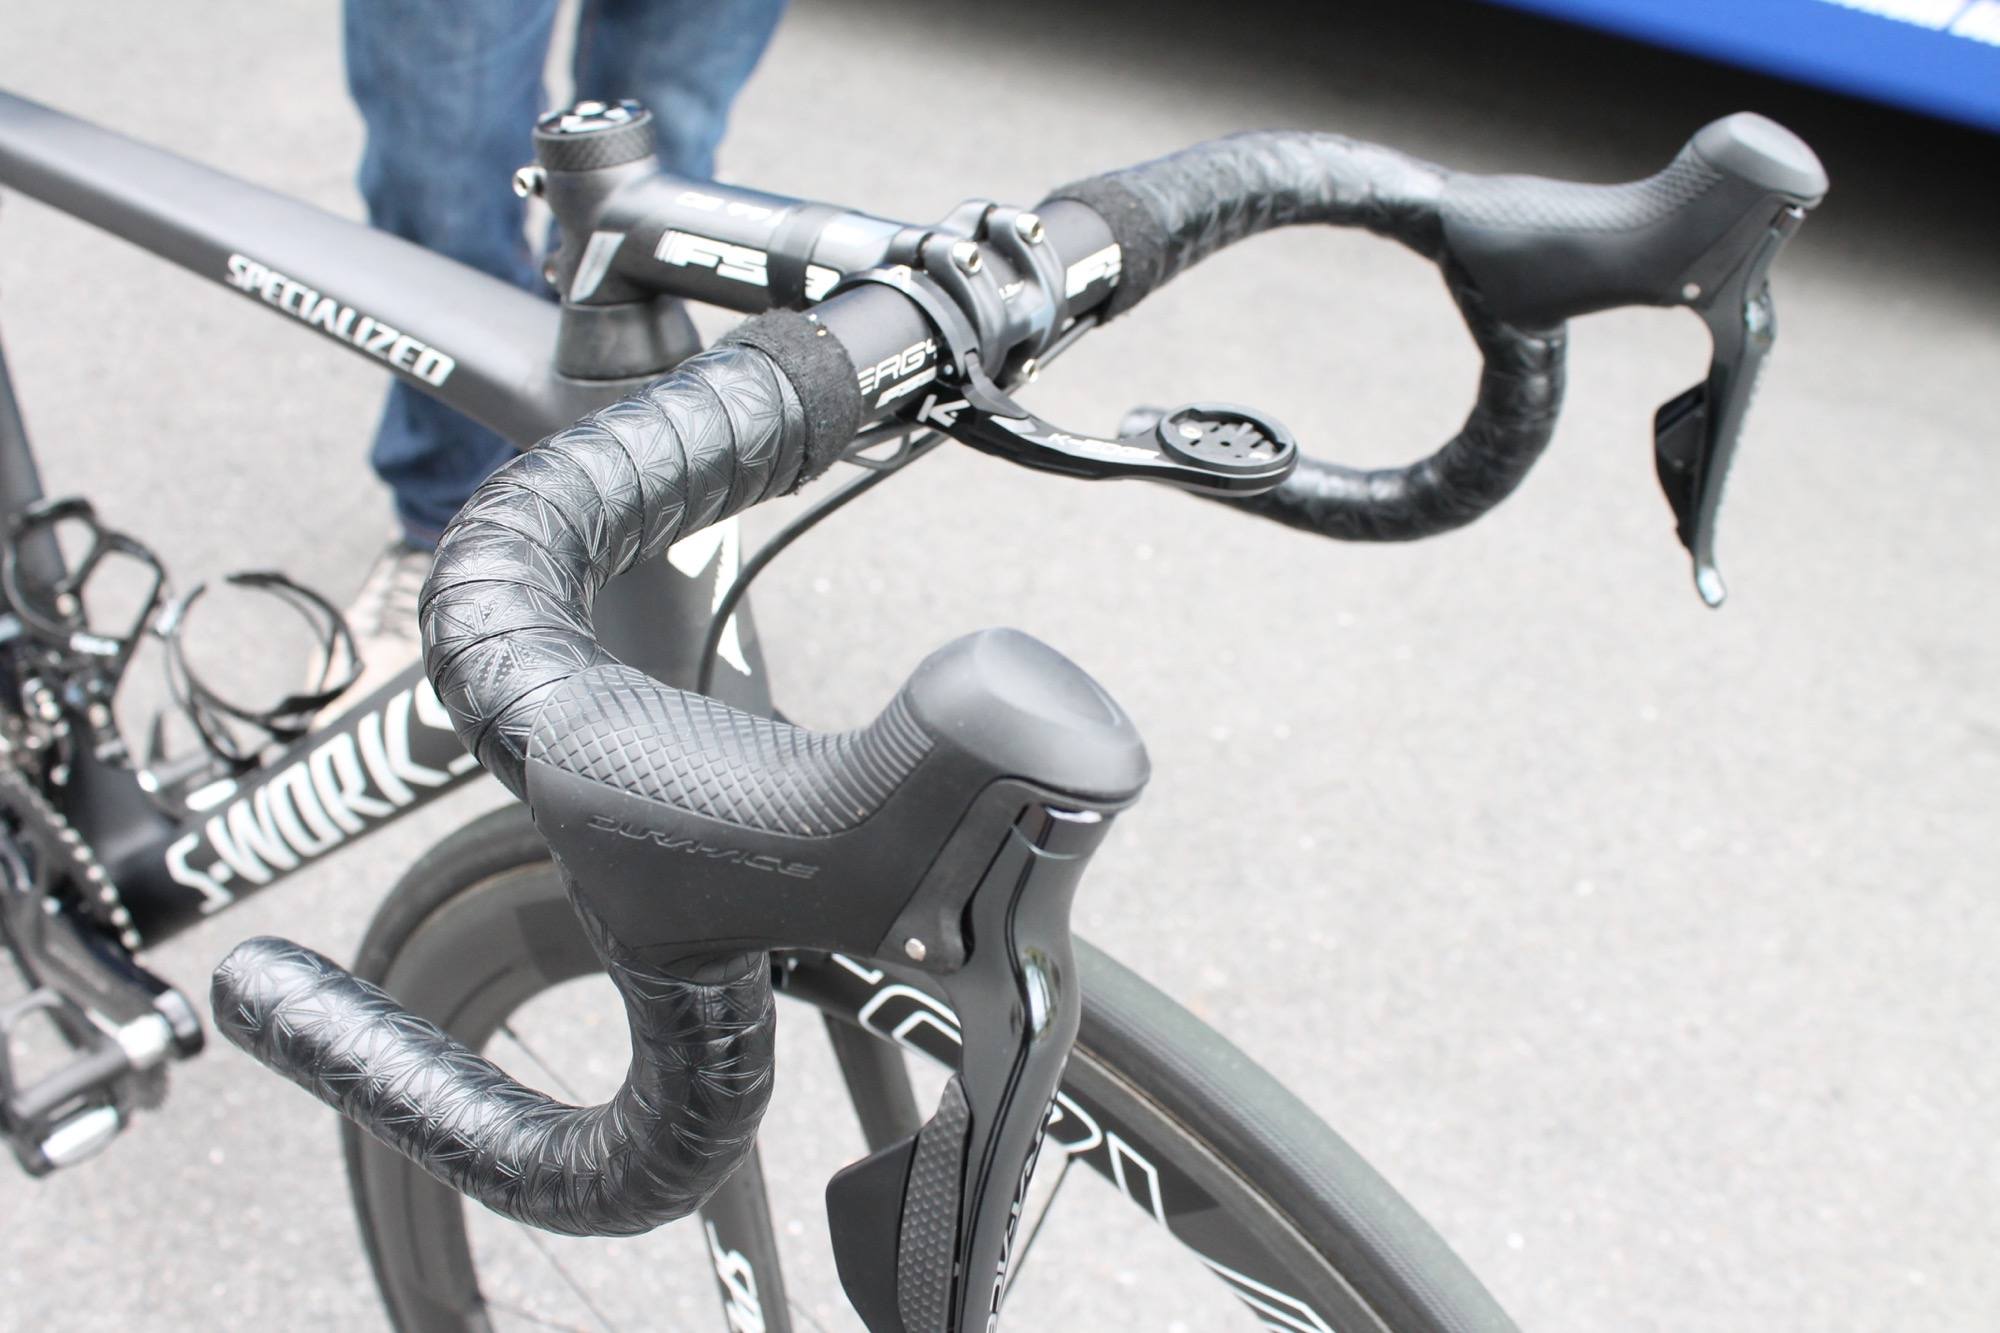 specialized compact handlebars